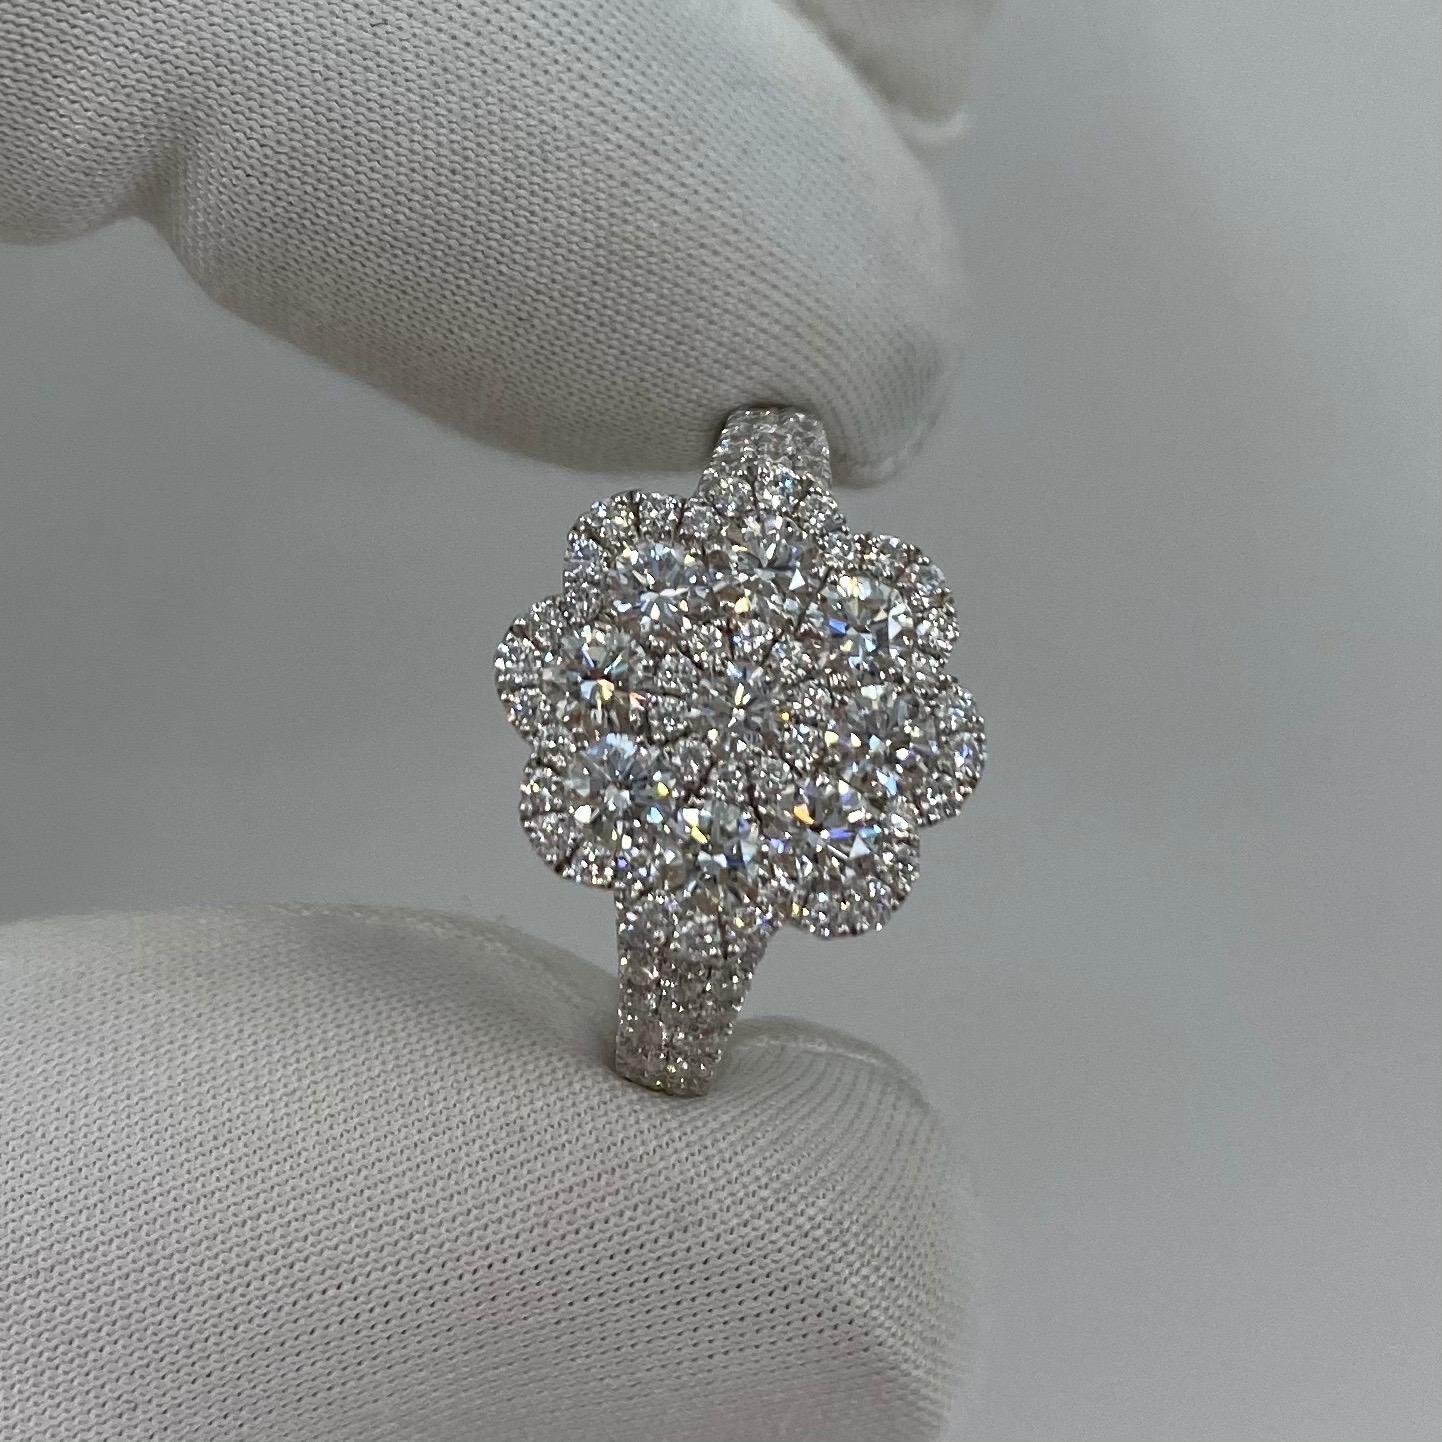 Art Nouveau Style Diamond Cluster Flower Ring.

A beautiful and unique 18 Karat white gold flower style ring, absolutely filled with pave-set diamonds.
1.50 Carat of diamonds with VS 1-2 clarity and E/F colour. All have an excellent cut and polish